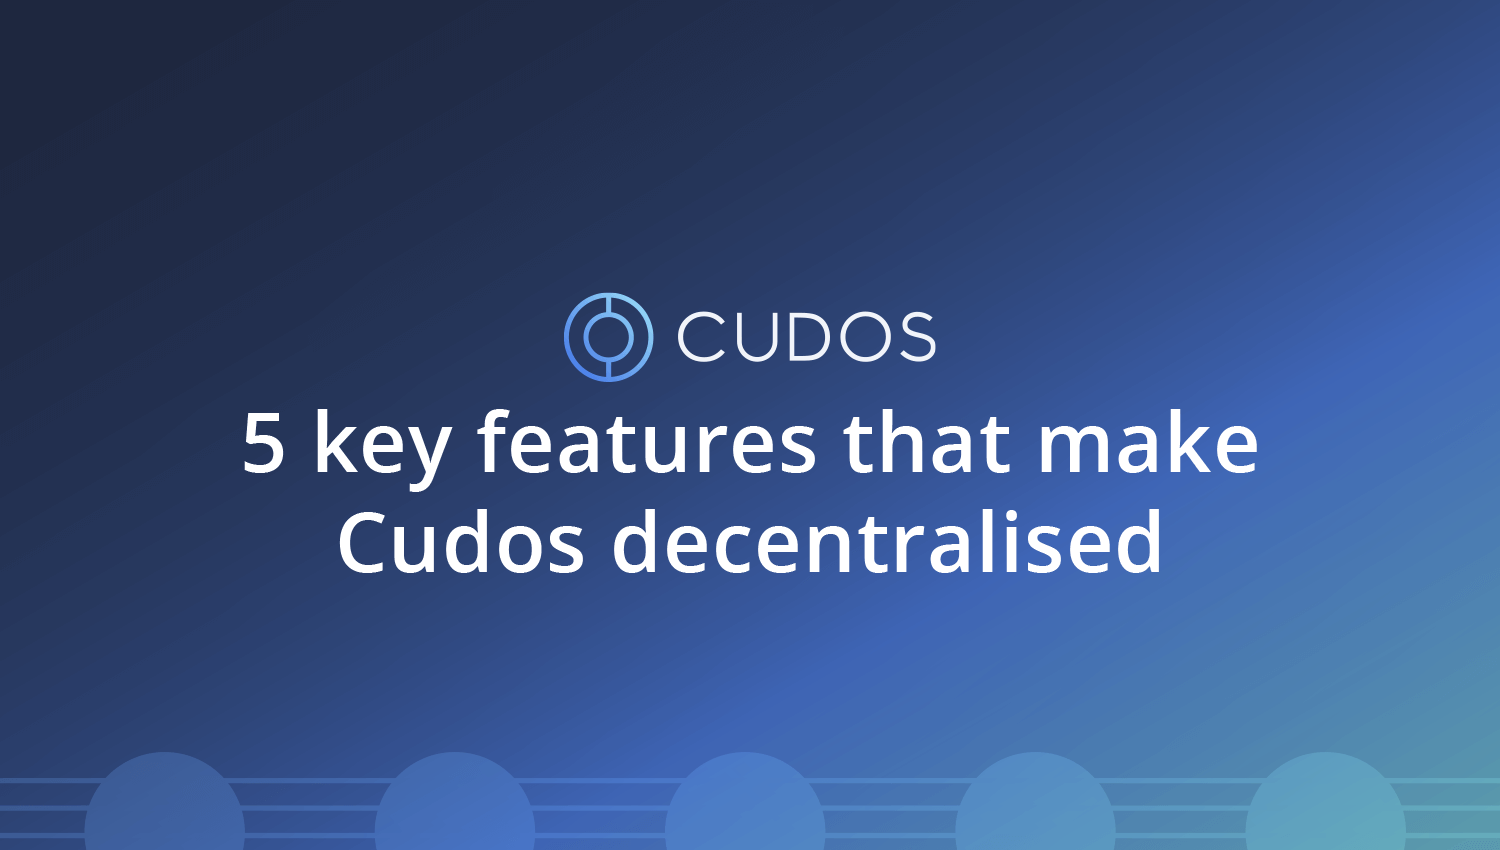 5 key features that make Cudos decentralised